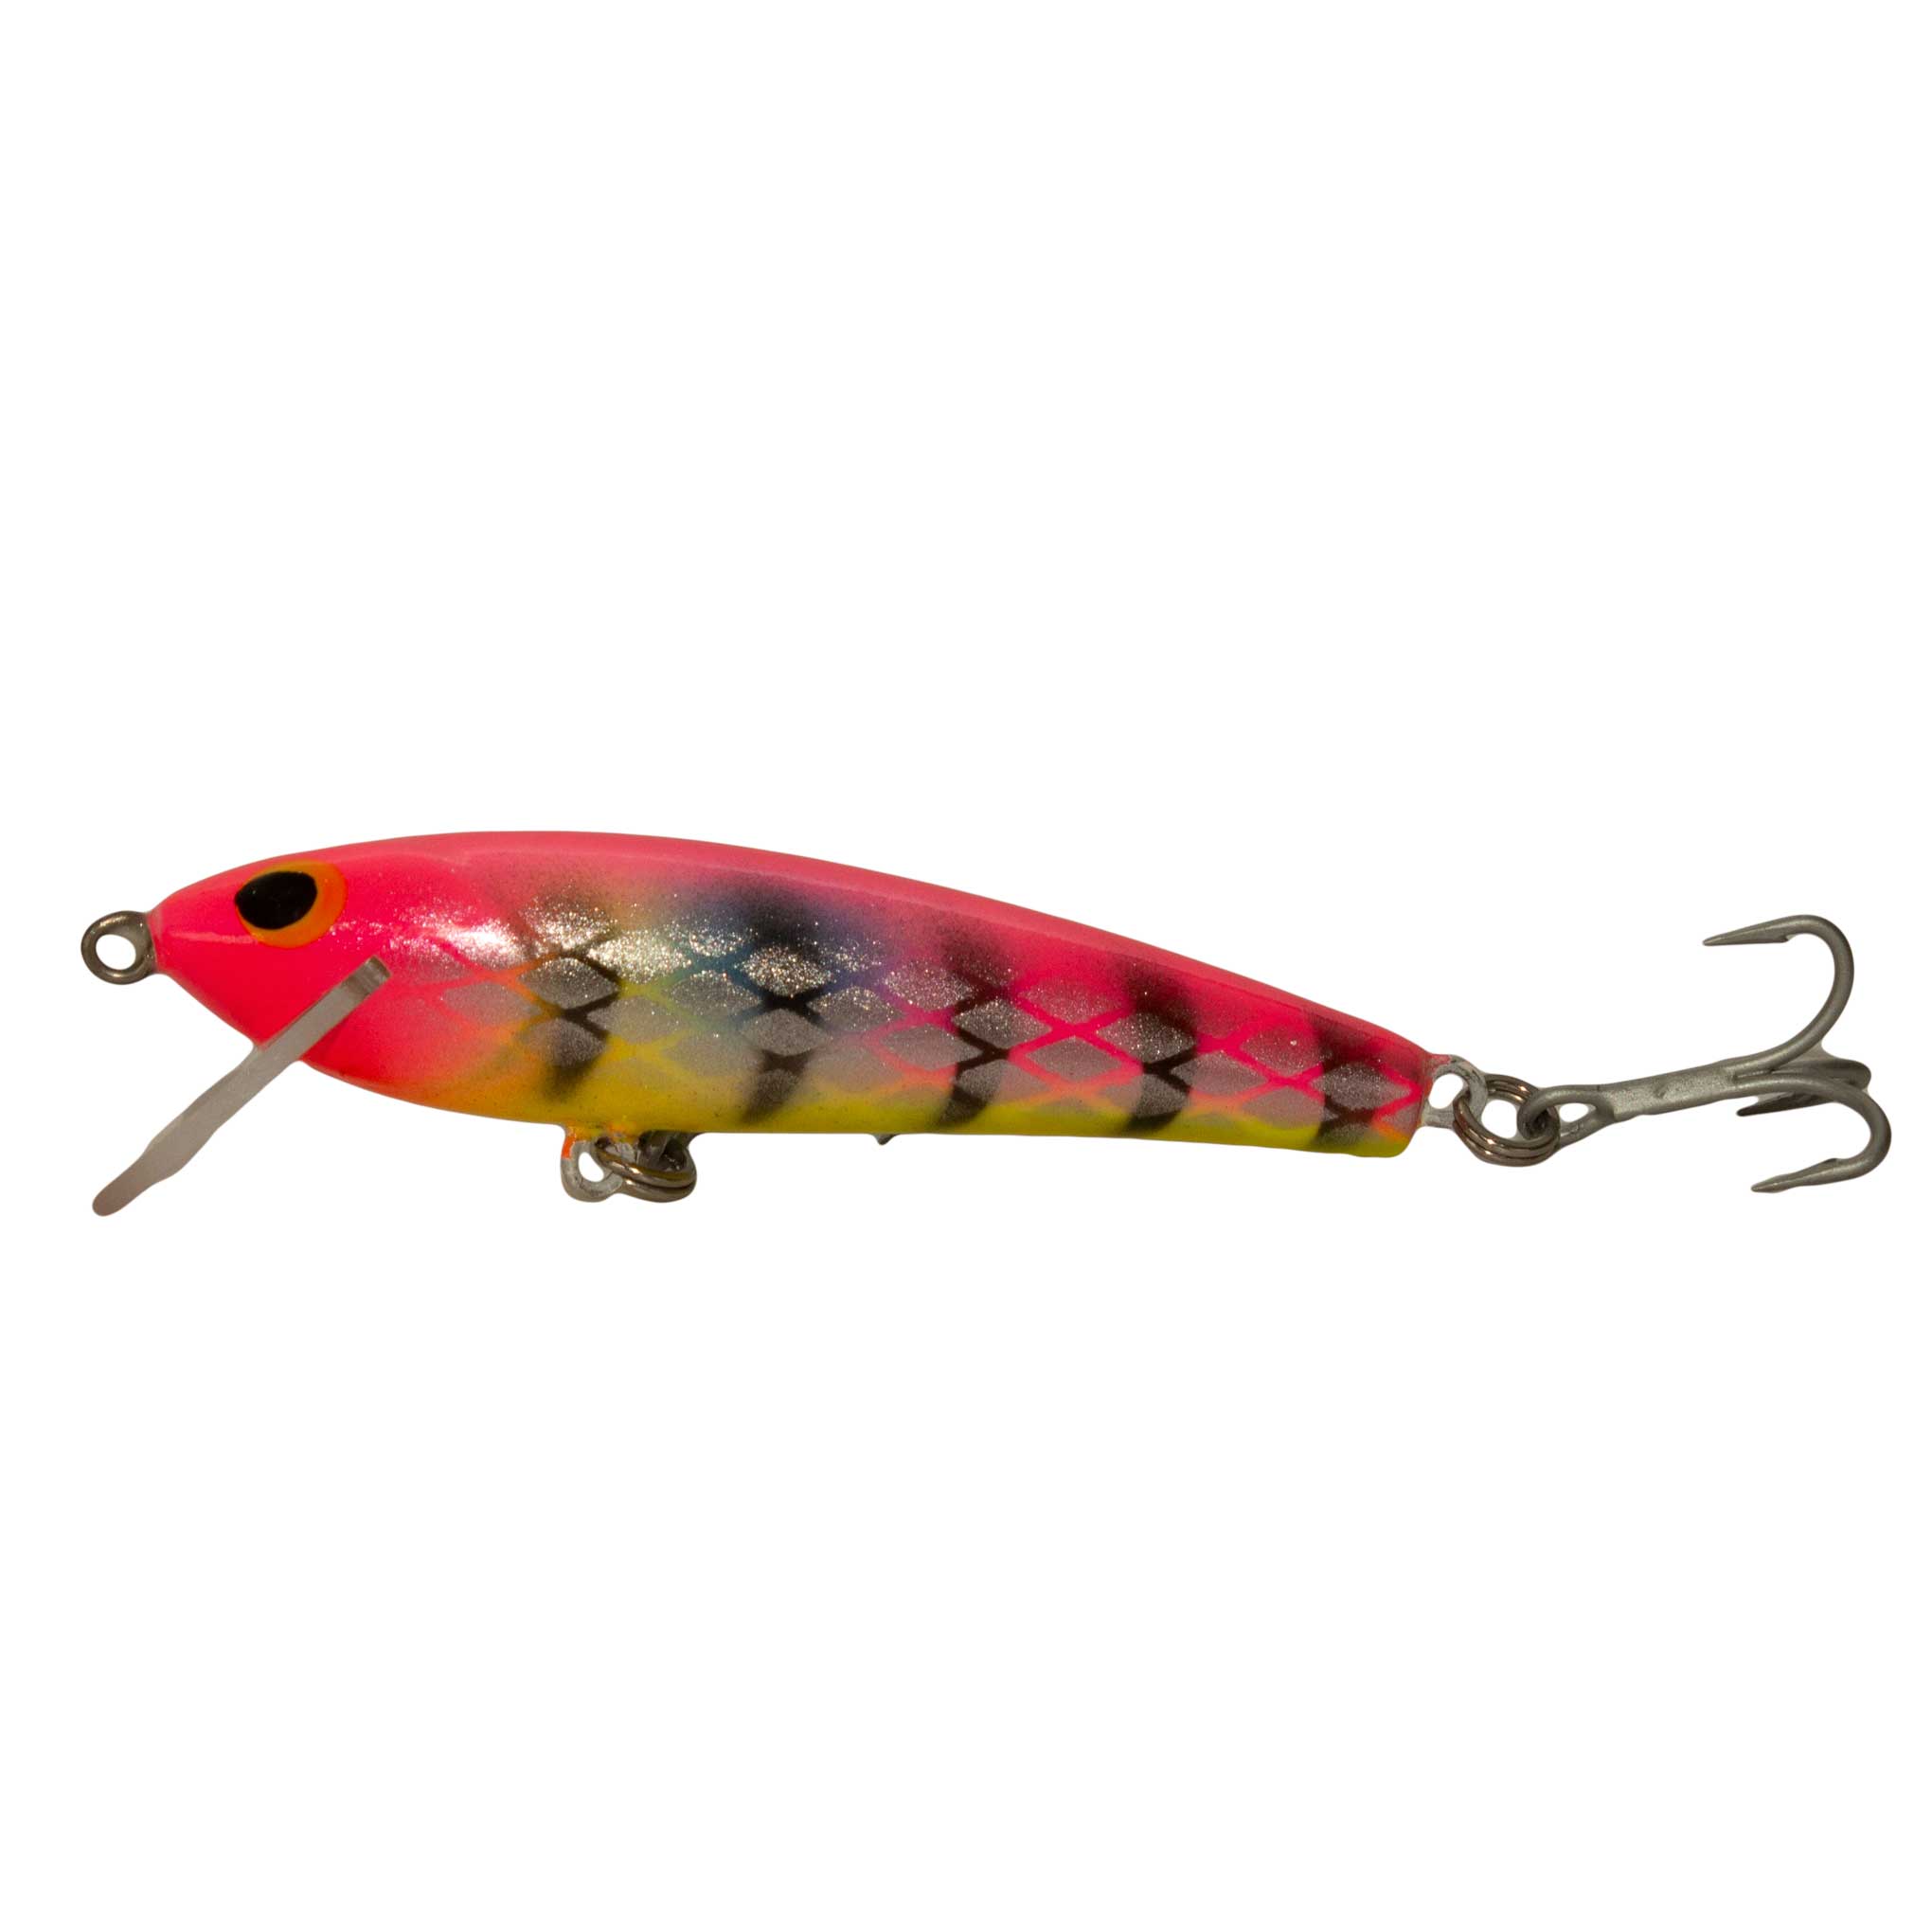 Mutt Shallow - 90mm Handcrafted Timber Fishing Lure - Old Dog